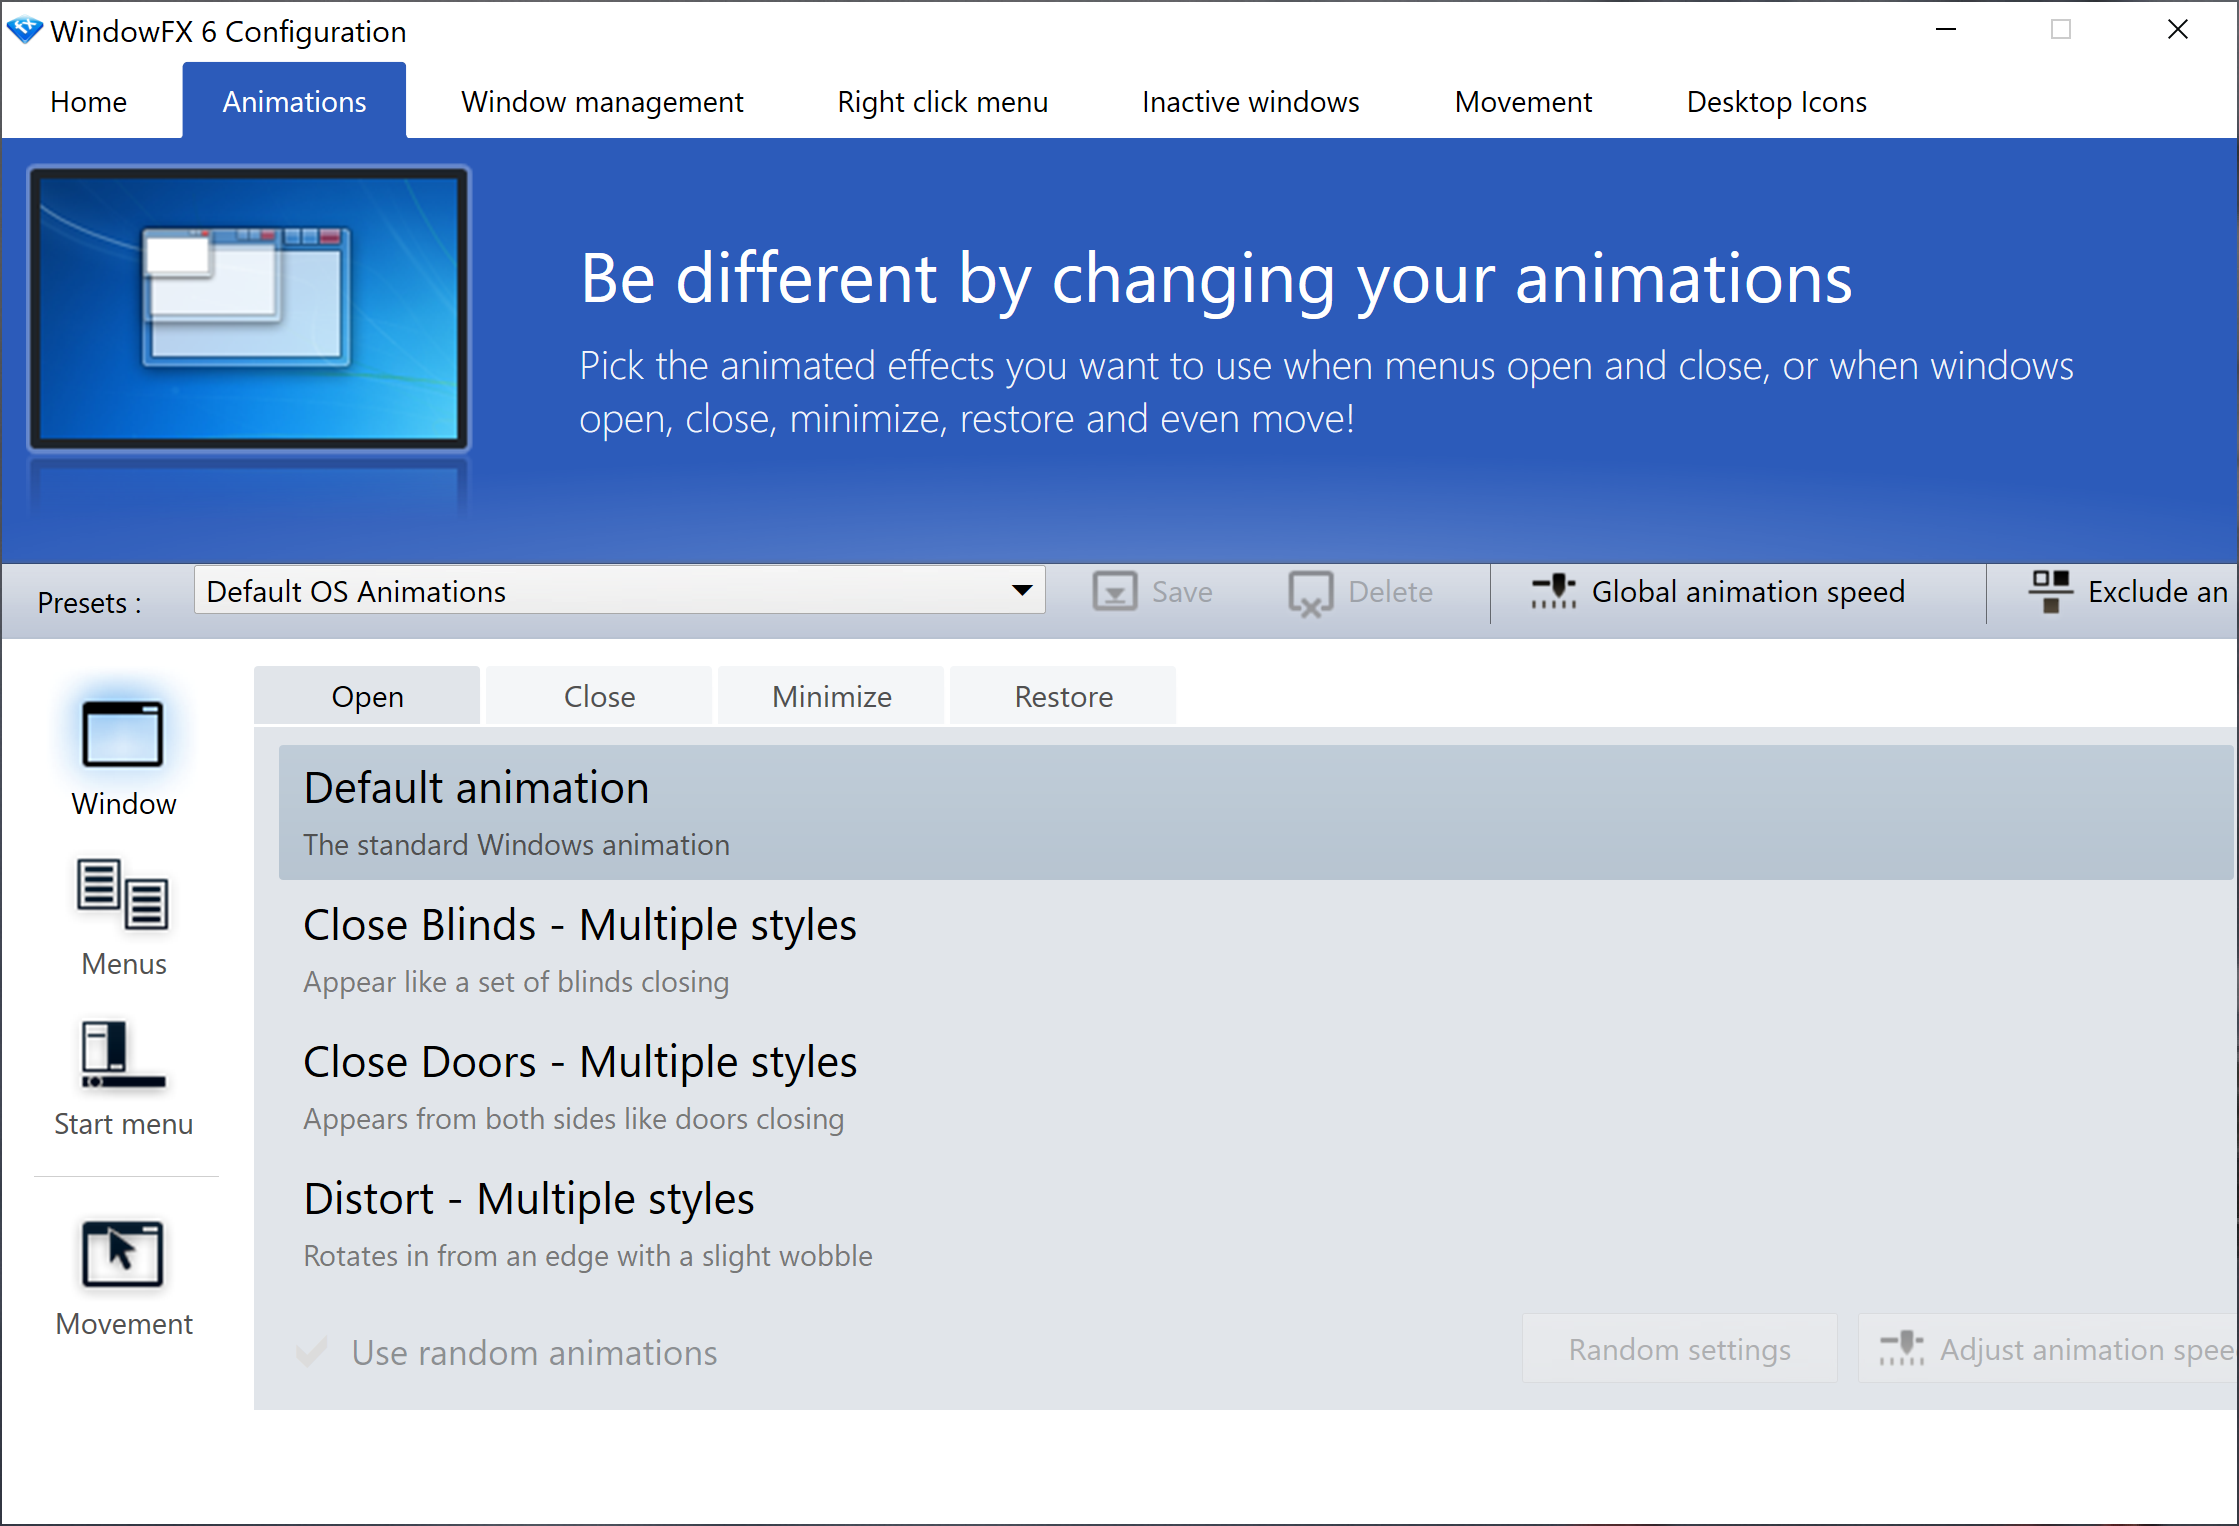 File:Windowfx animations.png